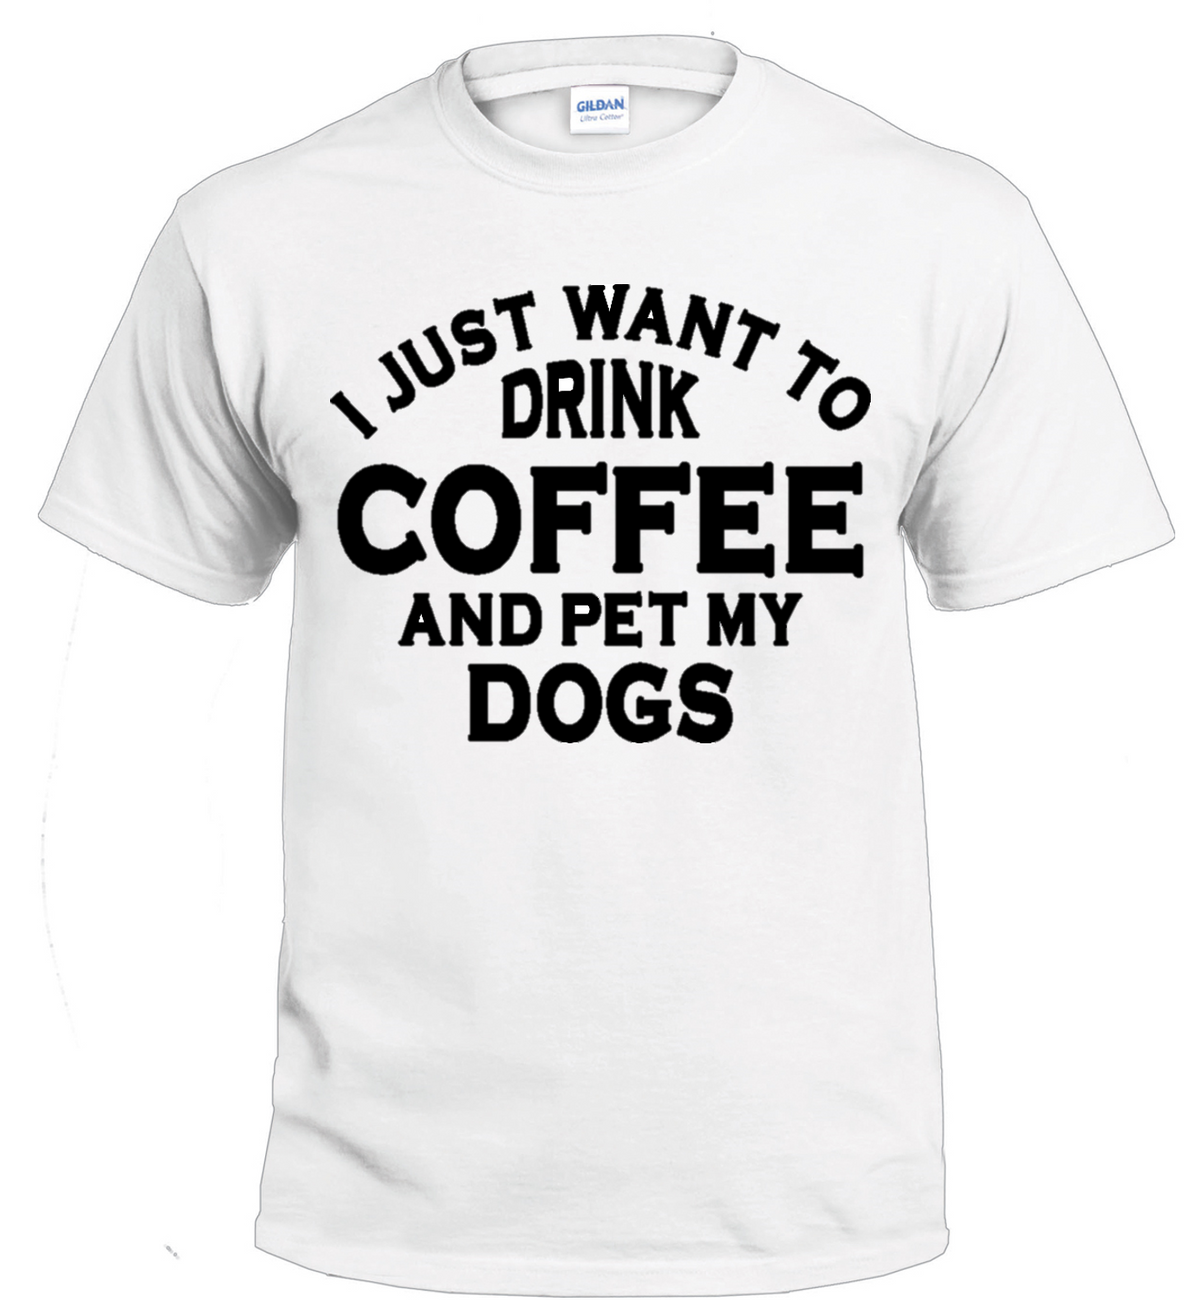 I Just Want to Drink Coffee and Pet My Dogs t-shirt